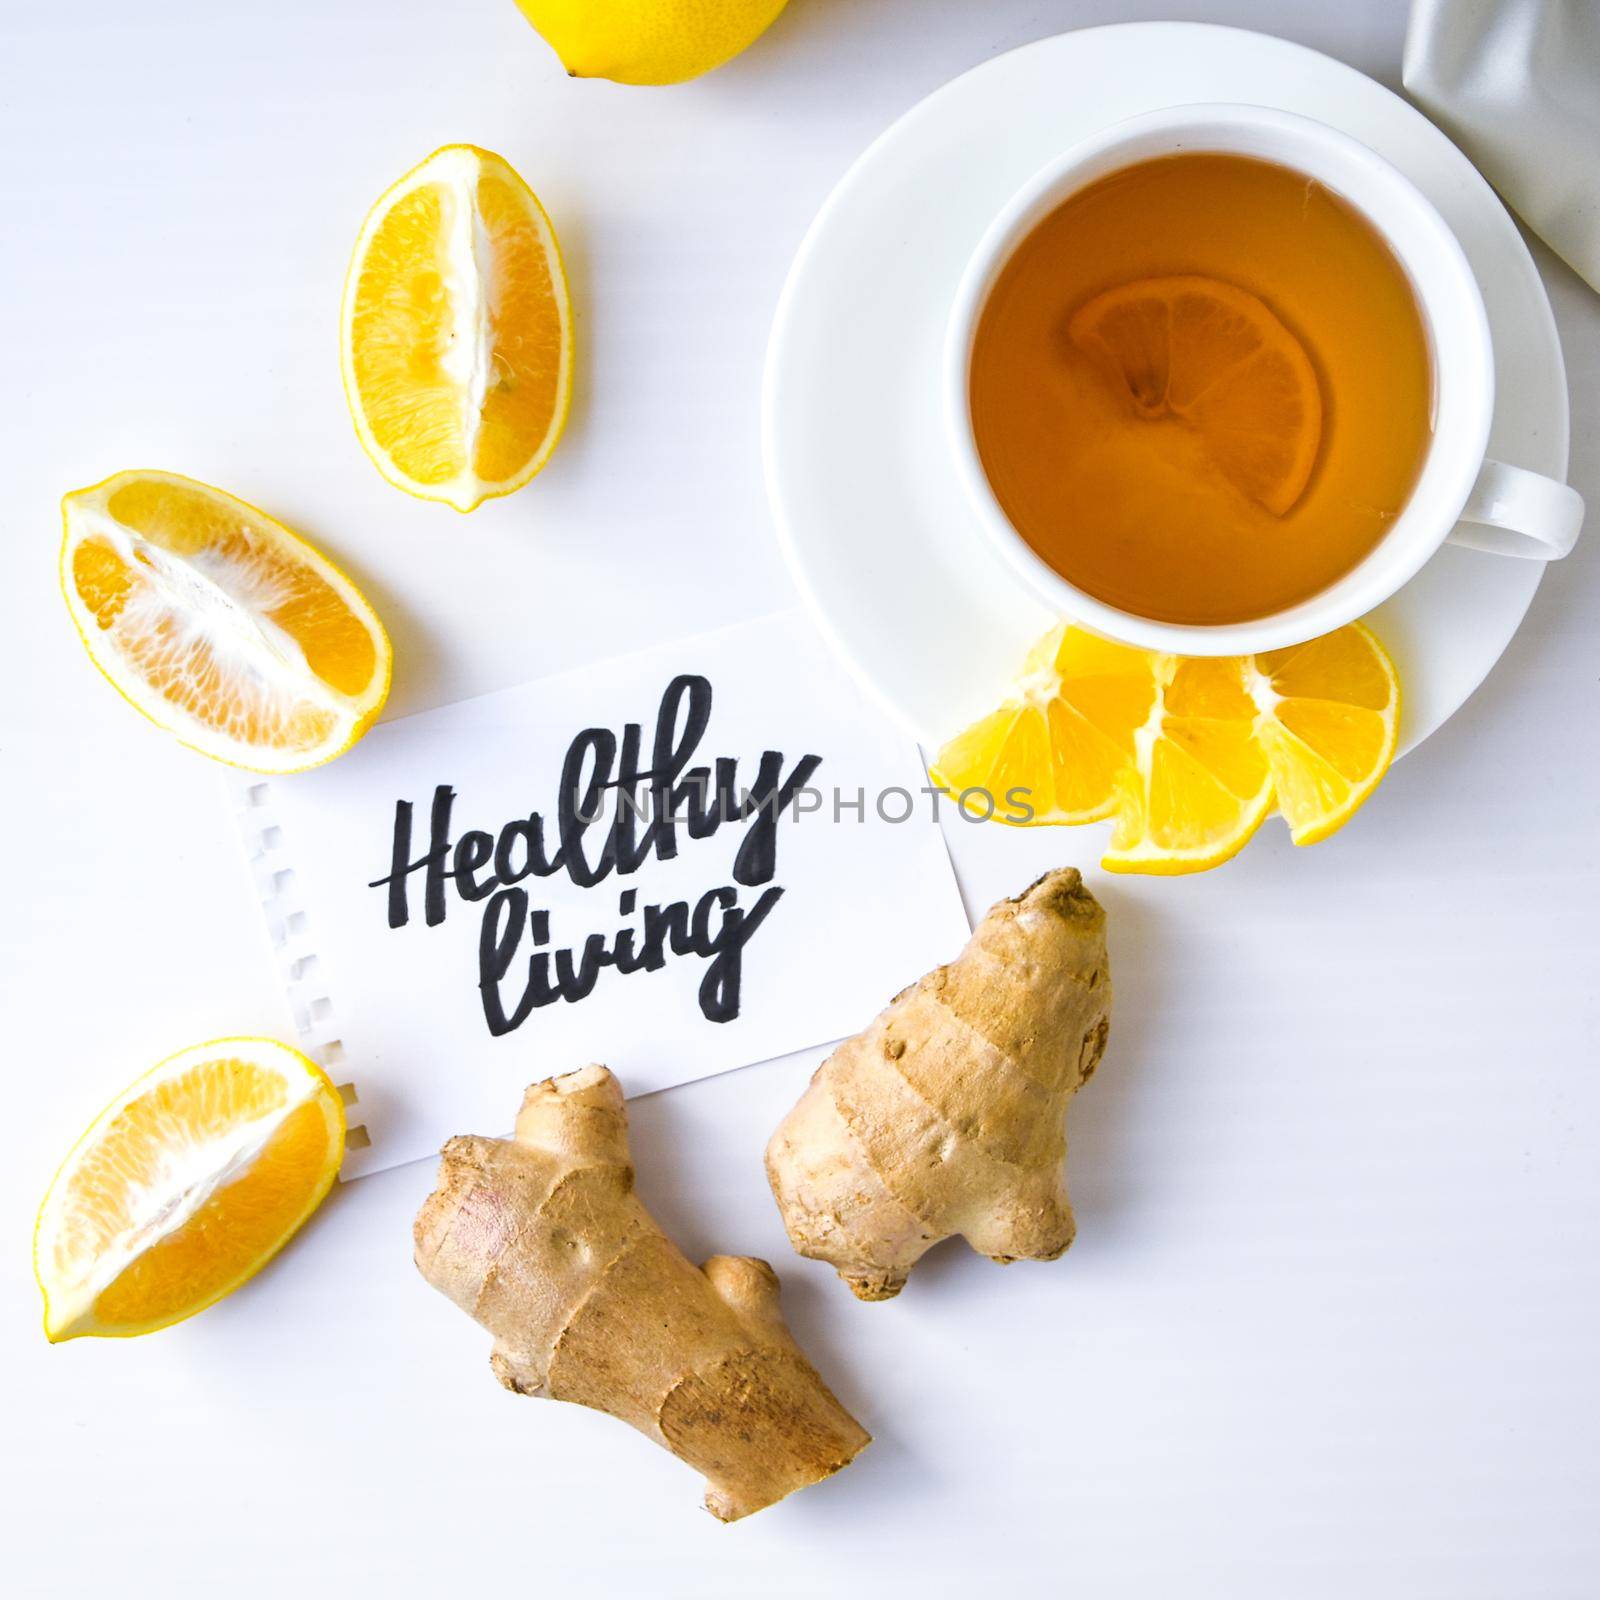 HEALTHY LIVING - written on piece of paper among the products for the treatment of common cold - lemon, ginger, chamomile tea. Vitamin natural drink. Cinnamon anise star.